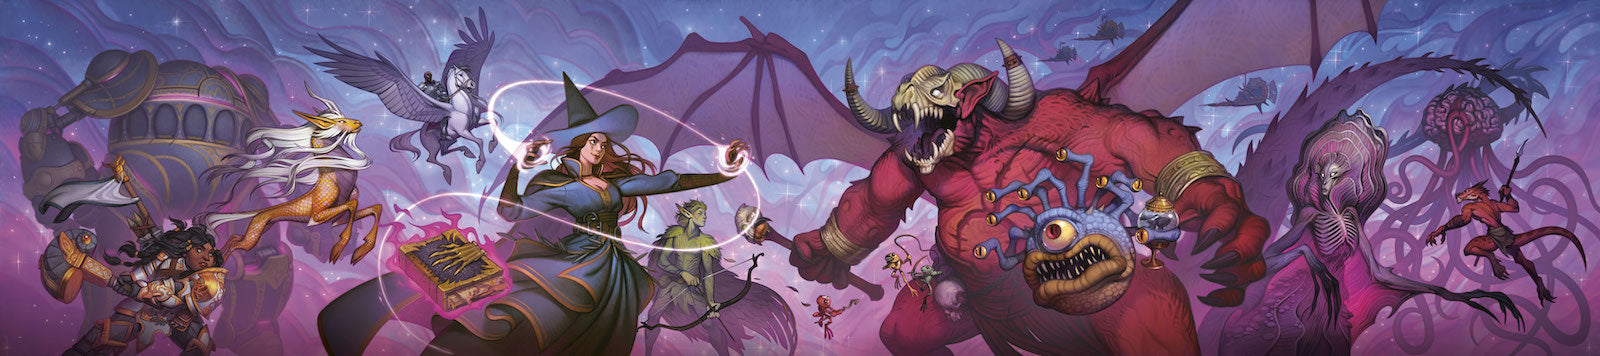 Dungeons and Dragons Expanded Rulebook Dungeon Master's Screen | D20 Games